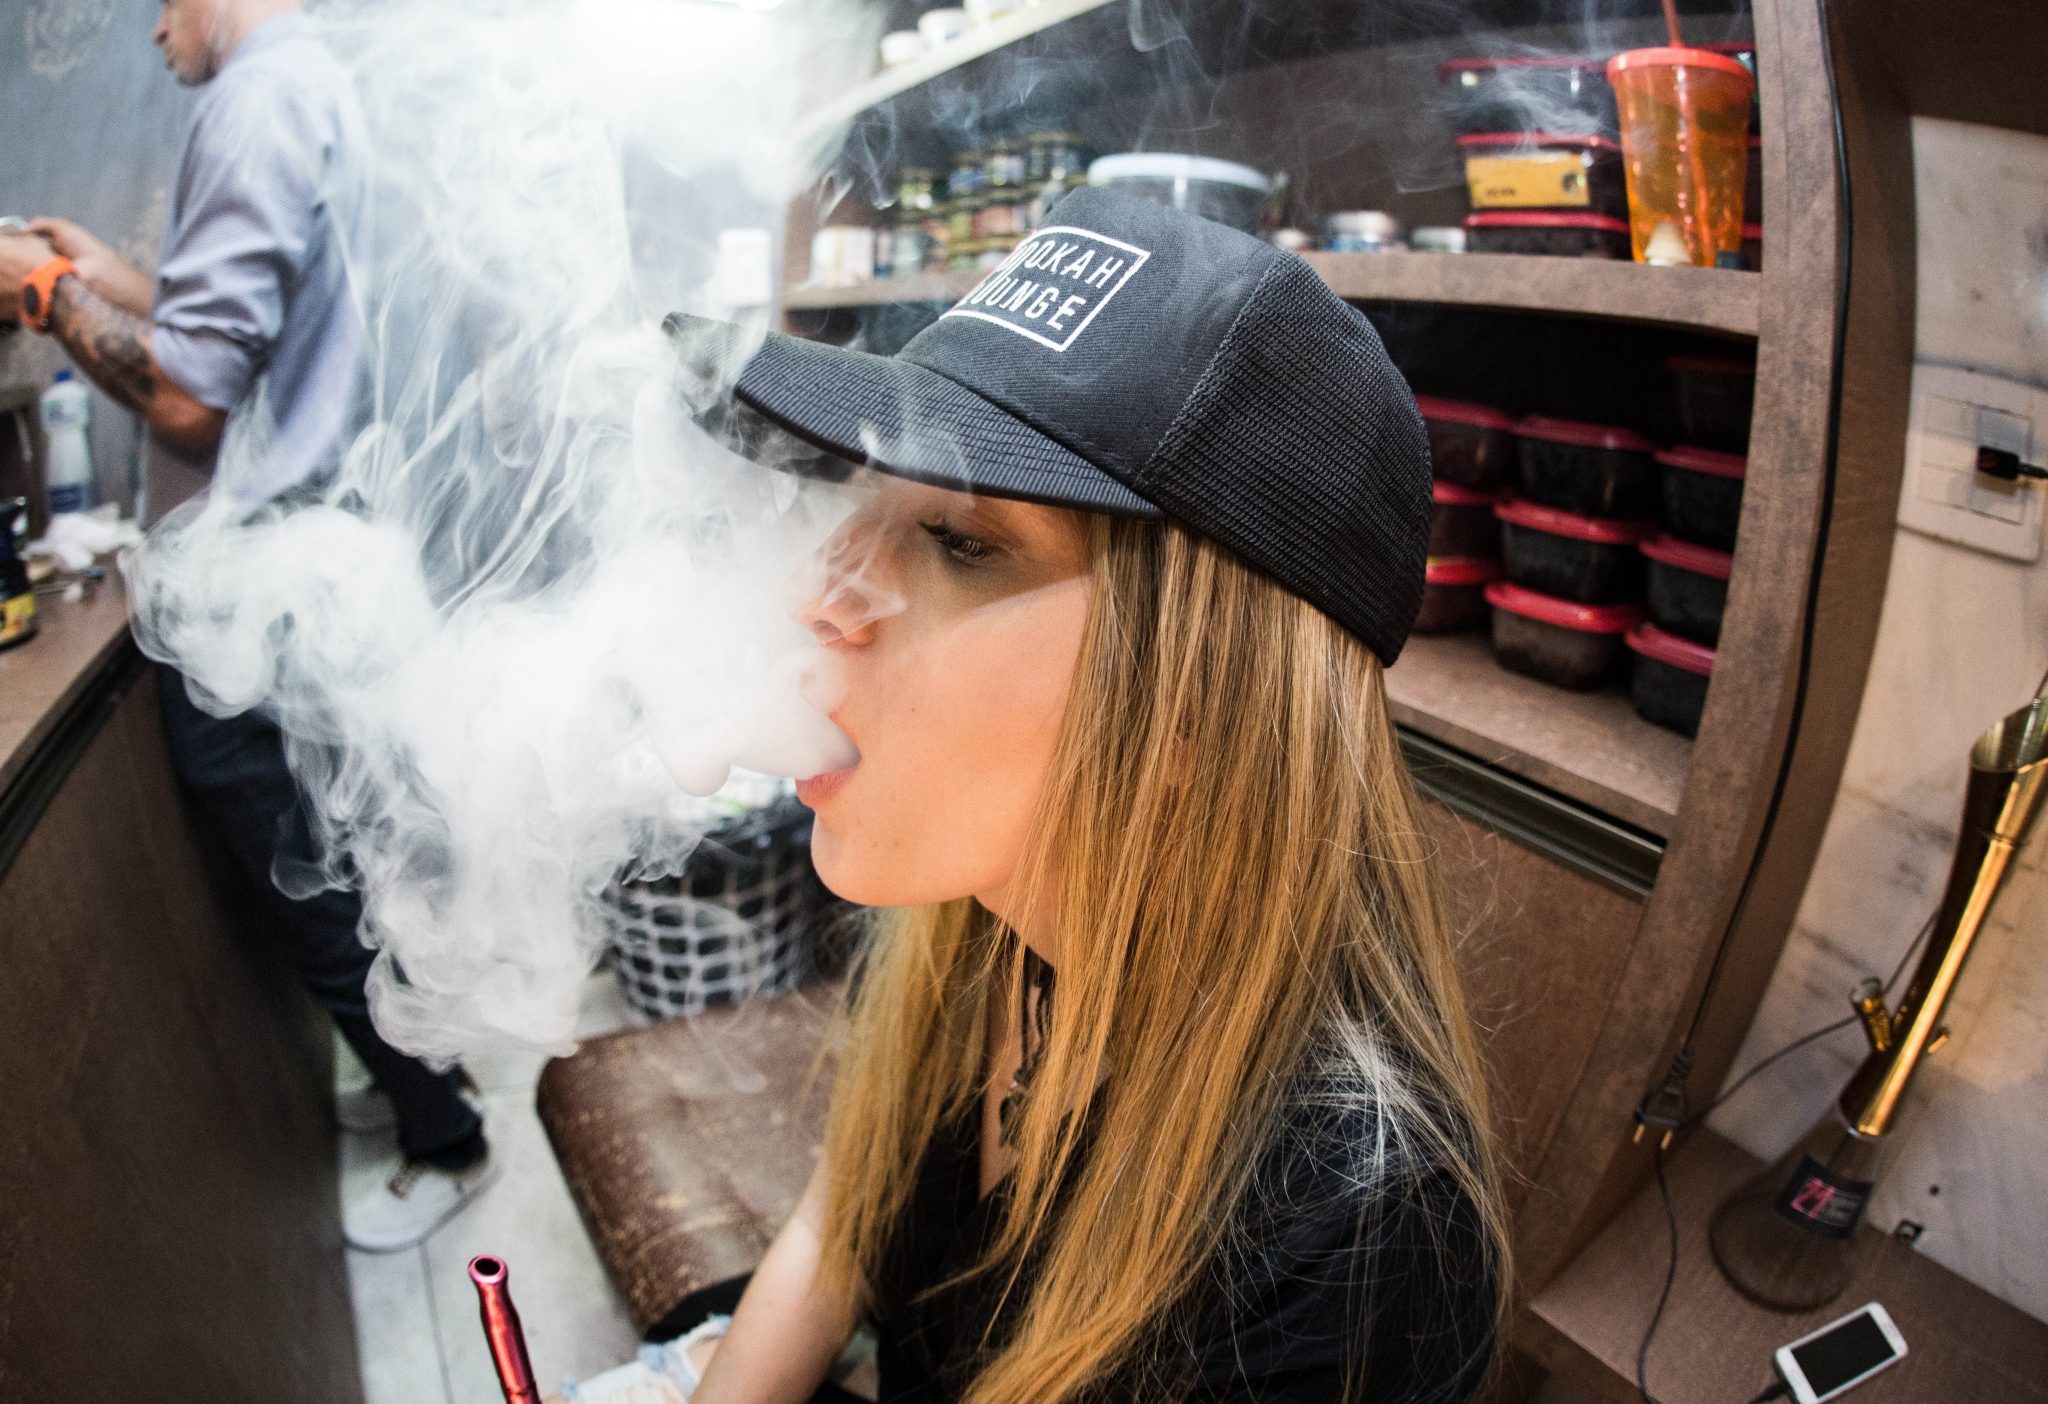 Read more on Online Advertising Restrictions For Vape Shops [& Workarounds!]